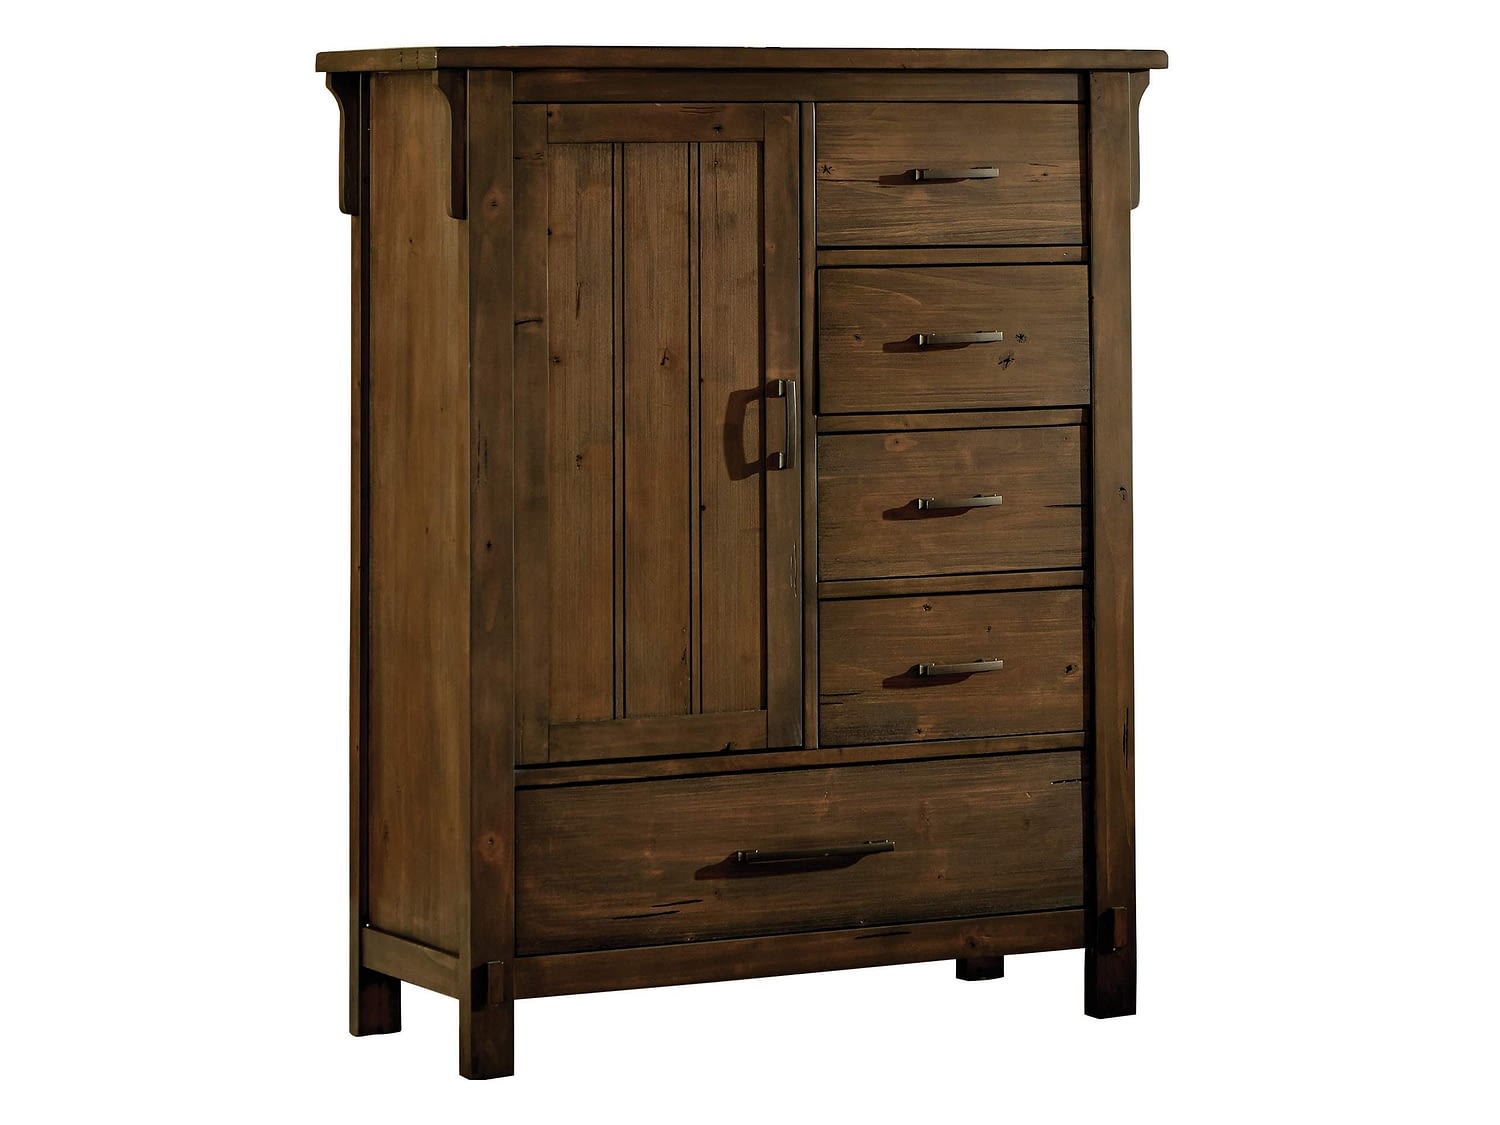 BAIRD Chest of Drawers - Zoom